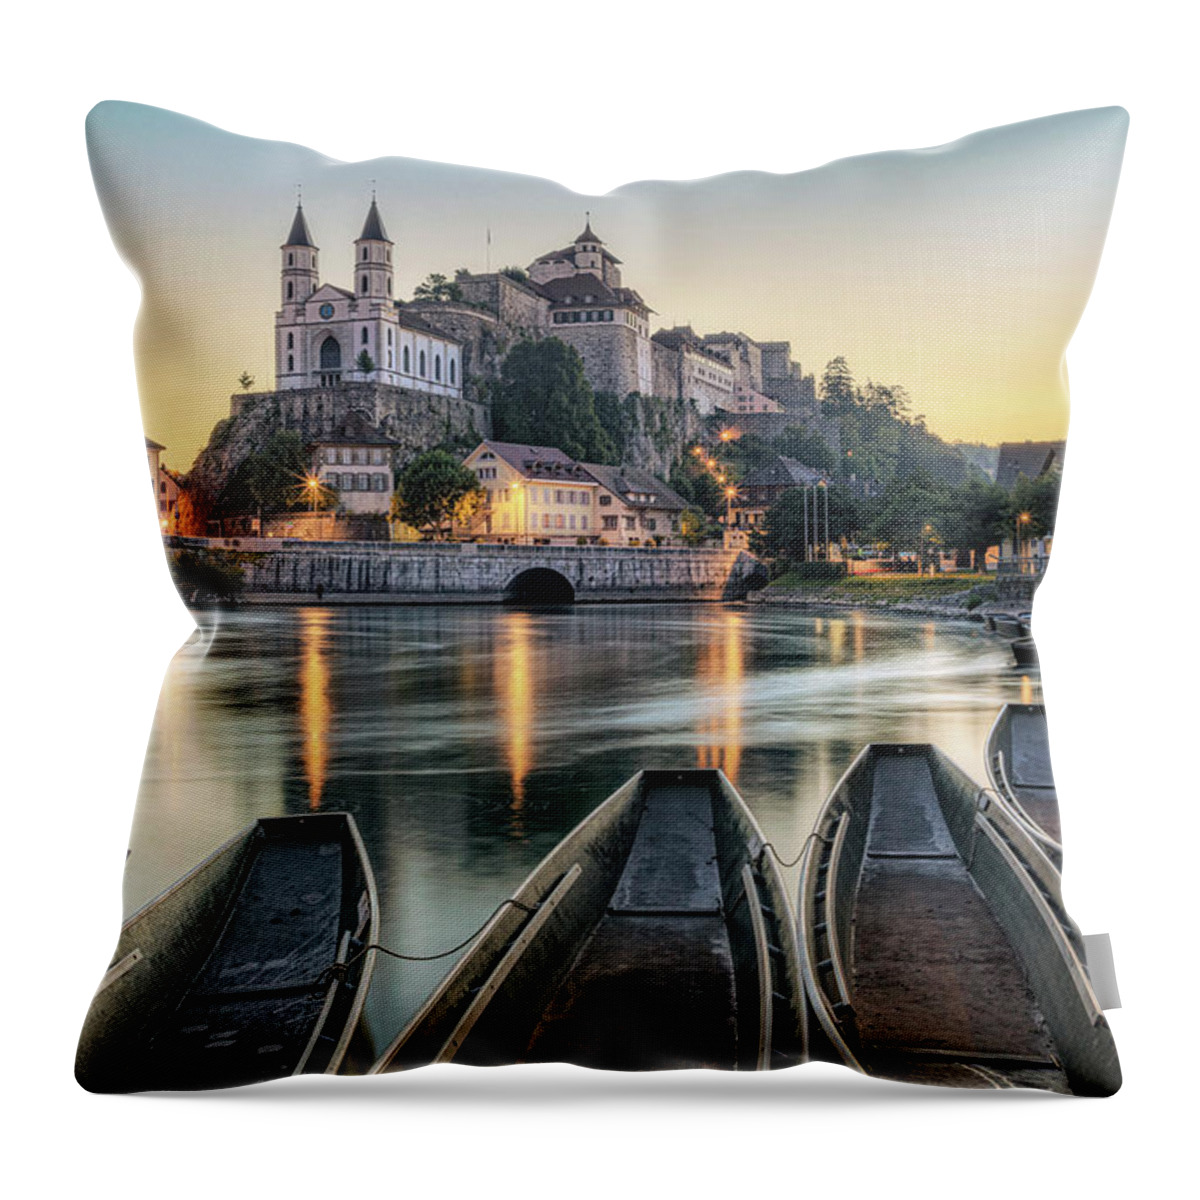 Aarburg Throw Pillow featuring the photograph Aarburg - Switzerland #5 by Joana Kruse